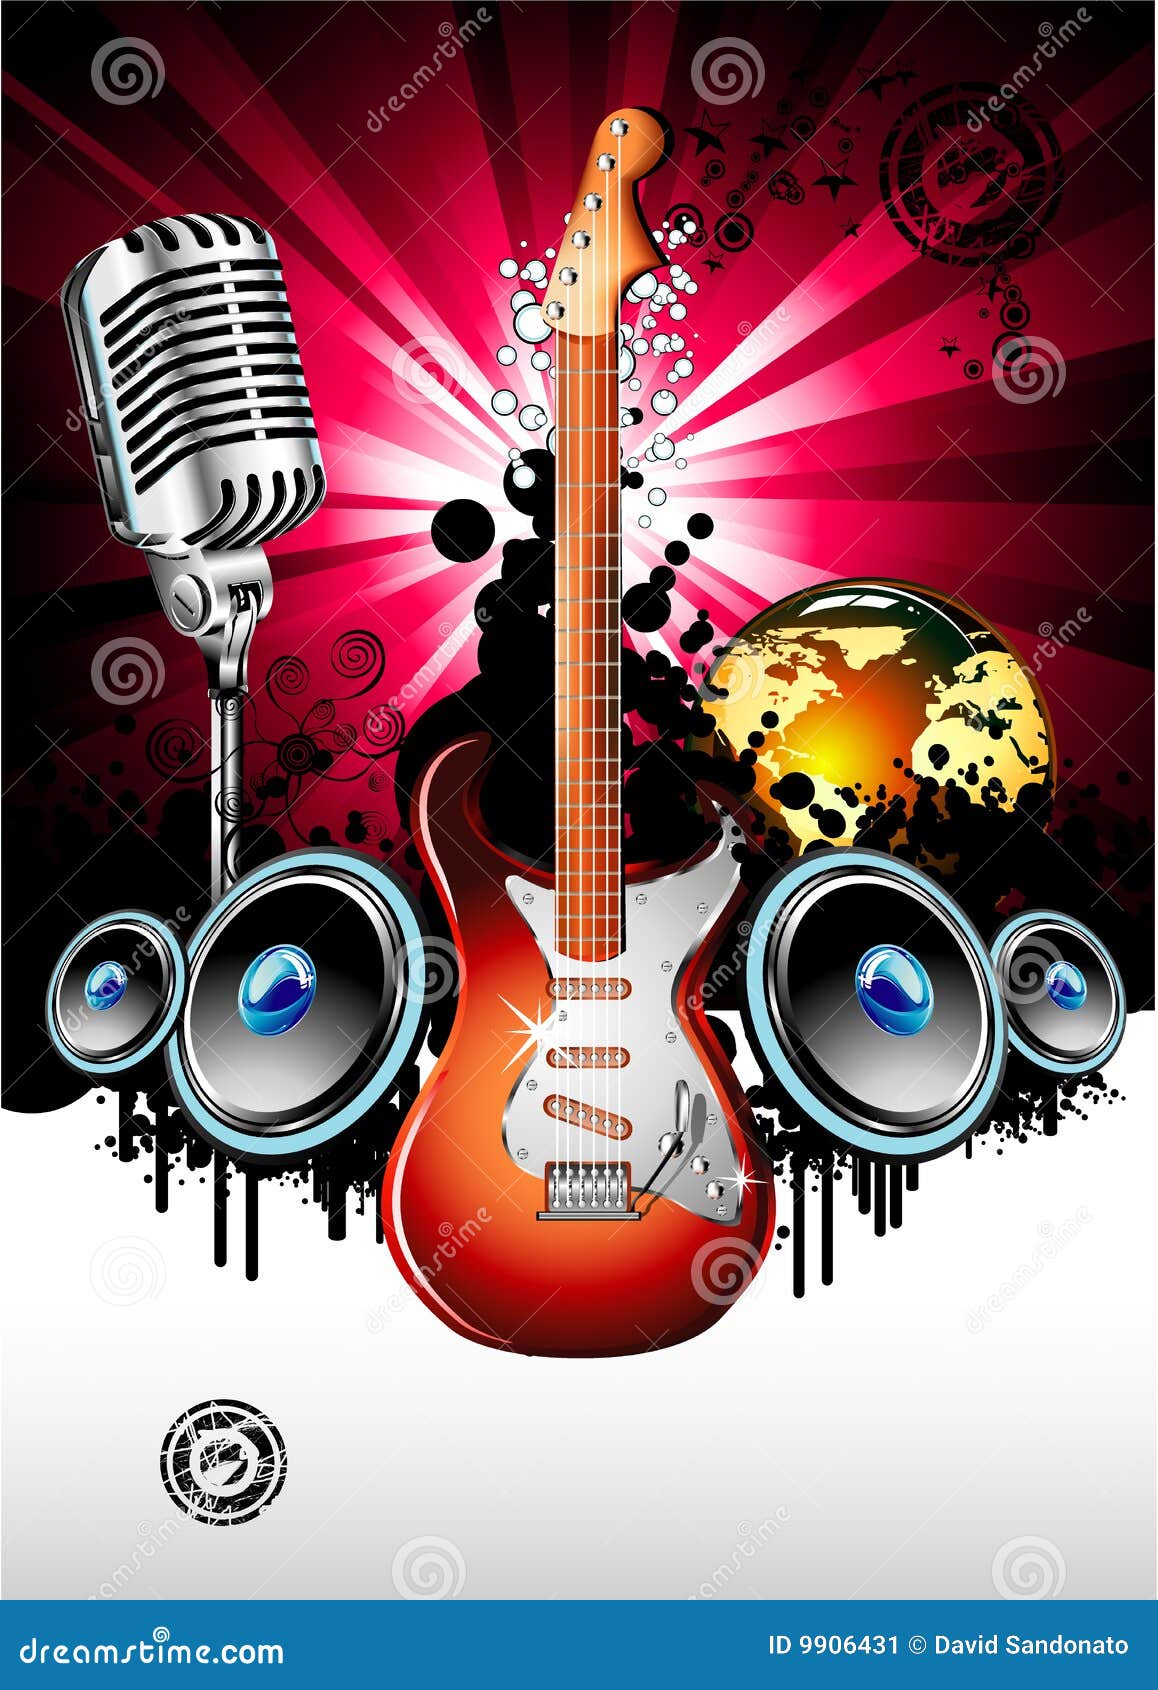 music event clipart - photo #7